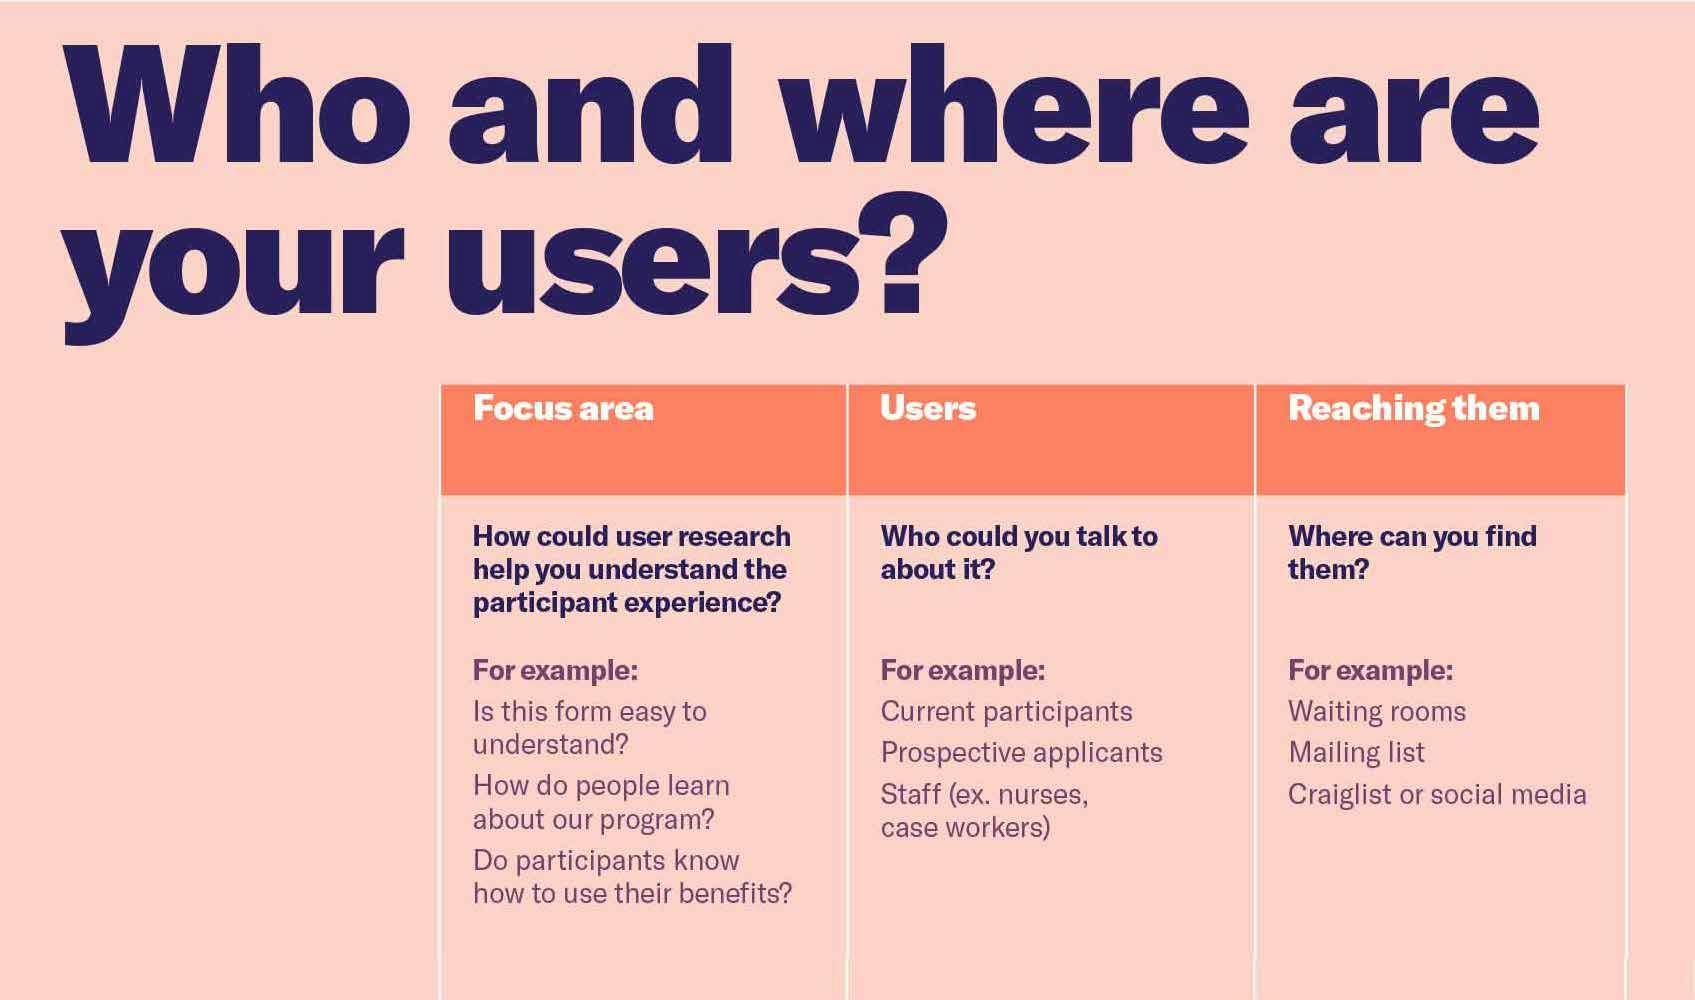 A chart showing how to determine who your users are and where to find them. User examples include participants or applicants found in waiting rooms or on mailing lists.